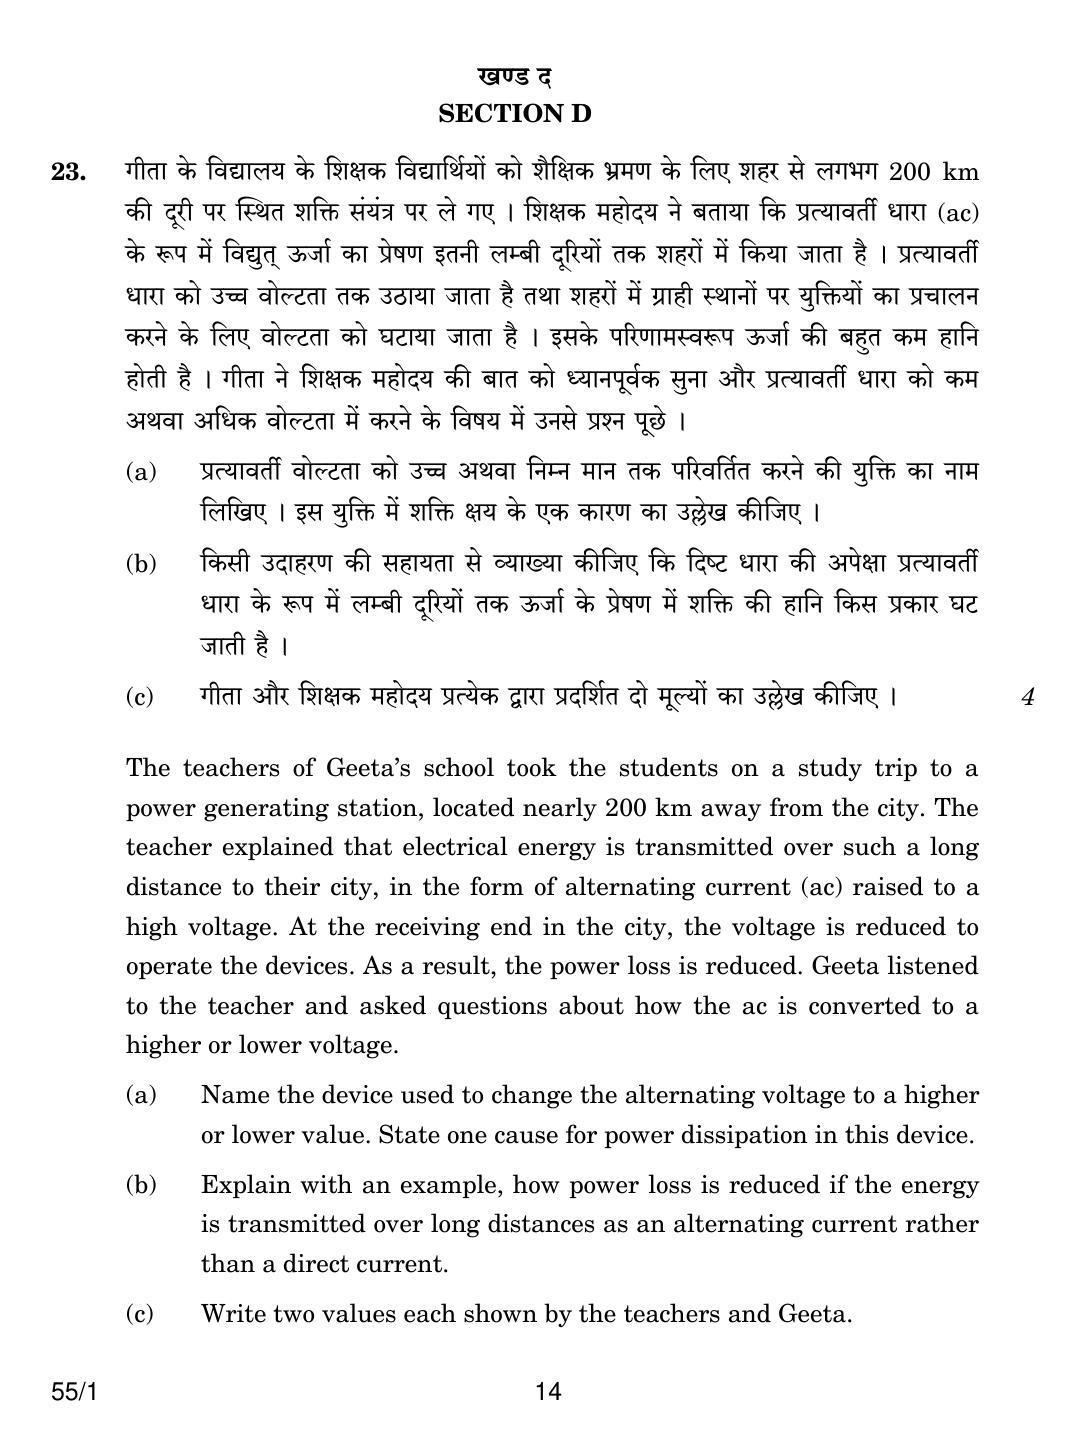 CBSE Class 12 55-1 PHYSICS 2018 Question Paper - Page 14